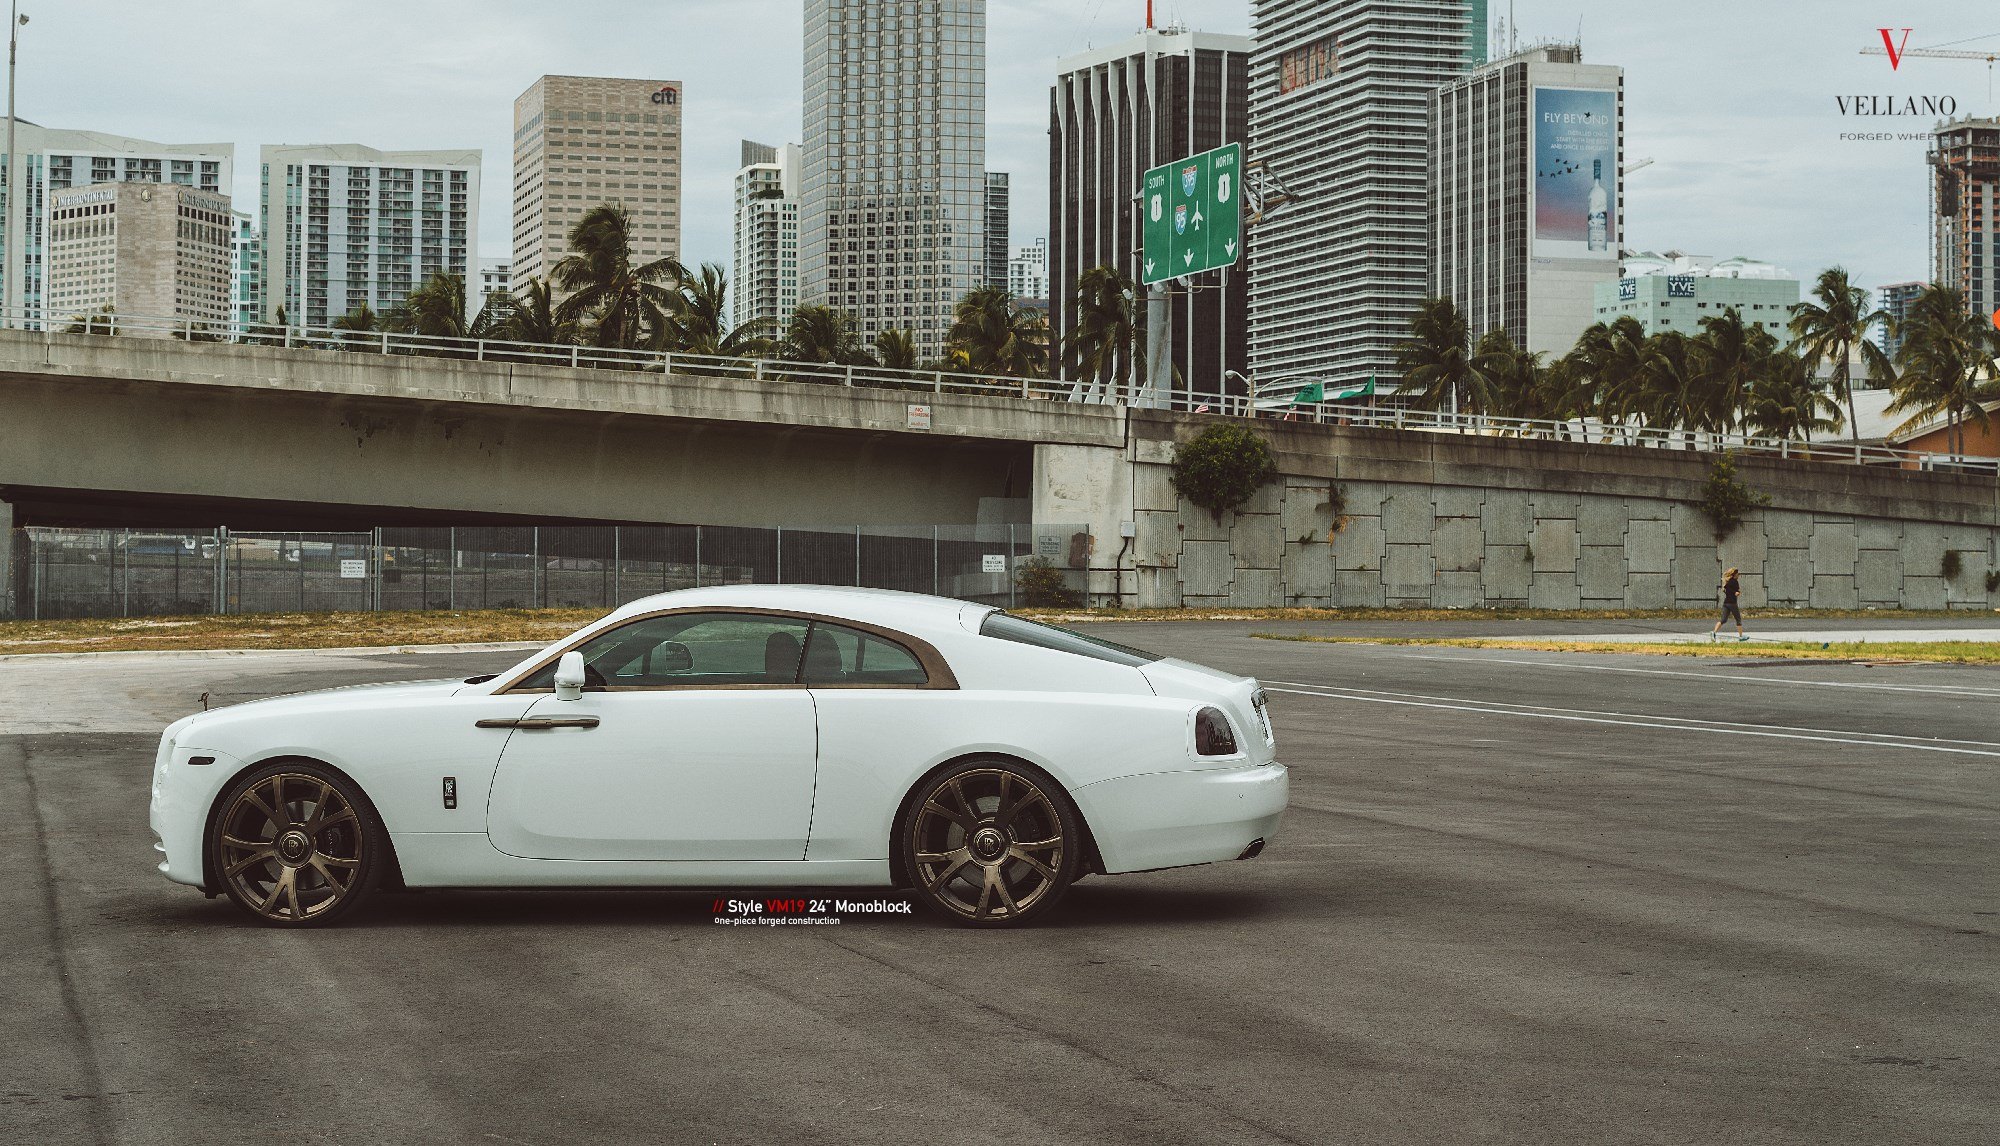 Custom White Rolls Royce Wraith with Bronze Accents - Photo by Vellano